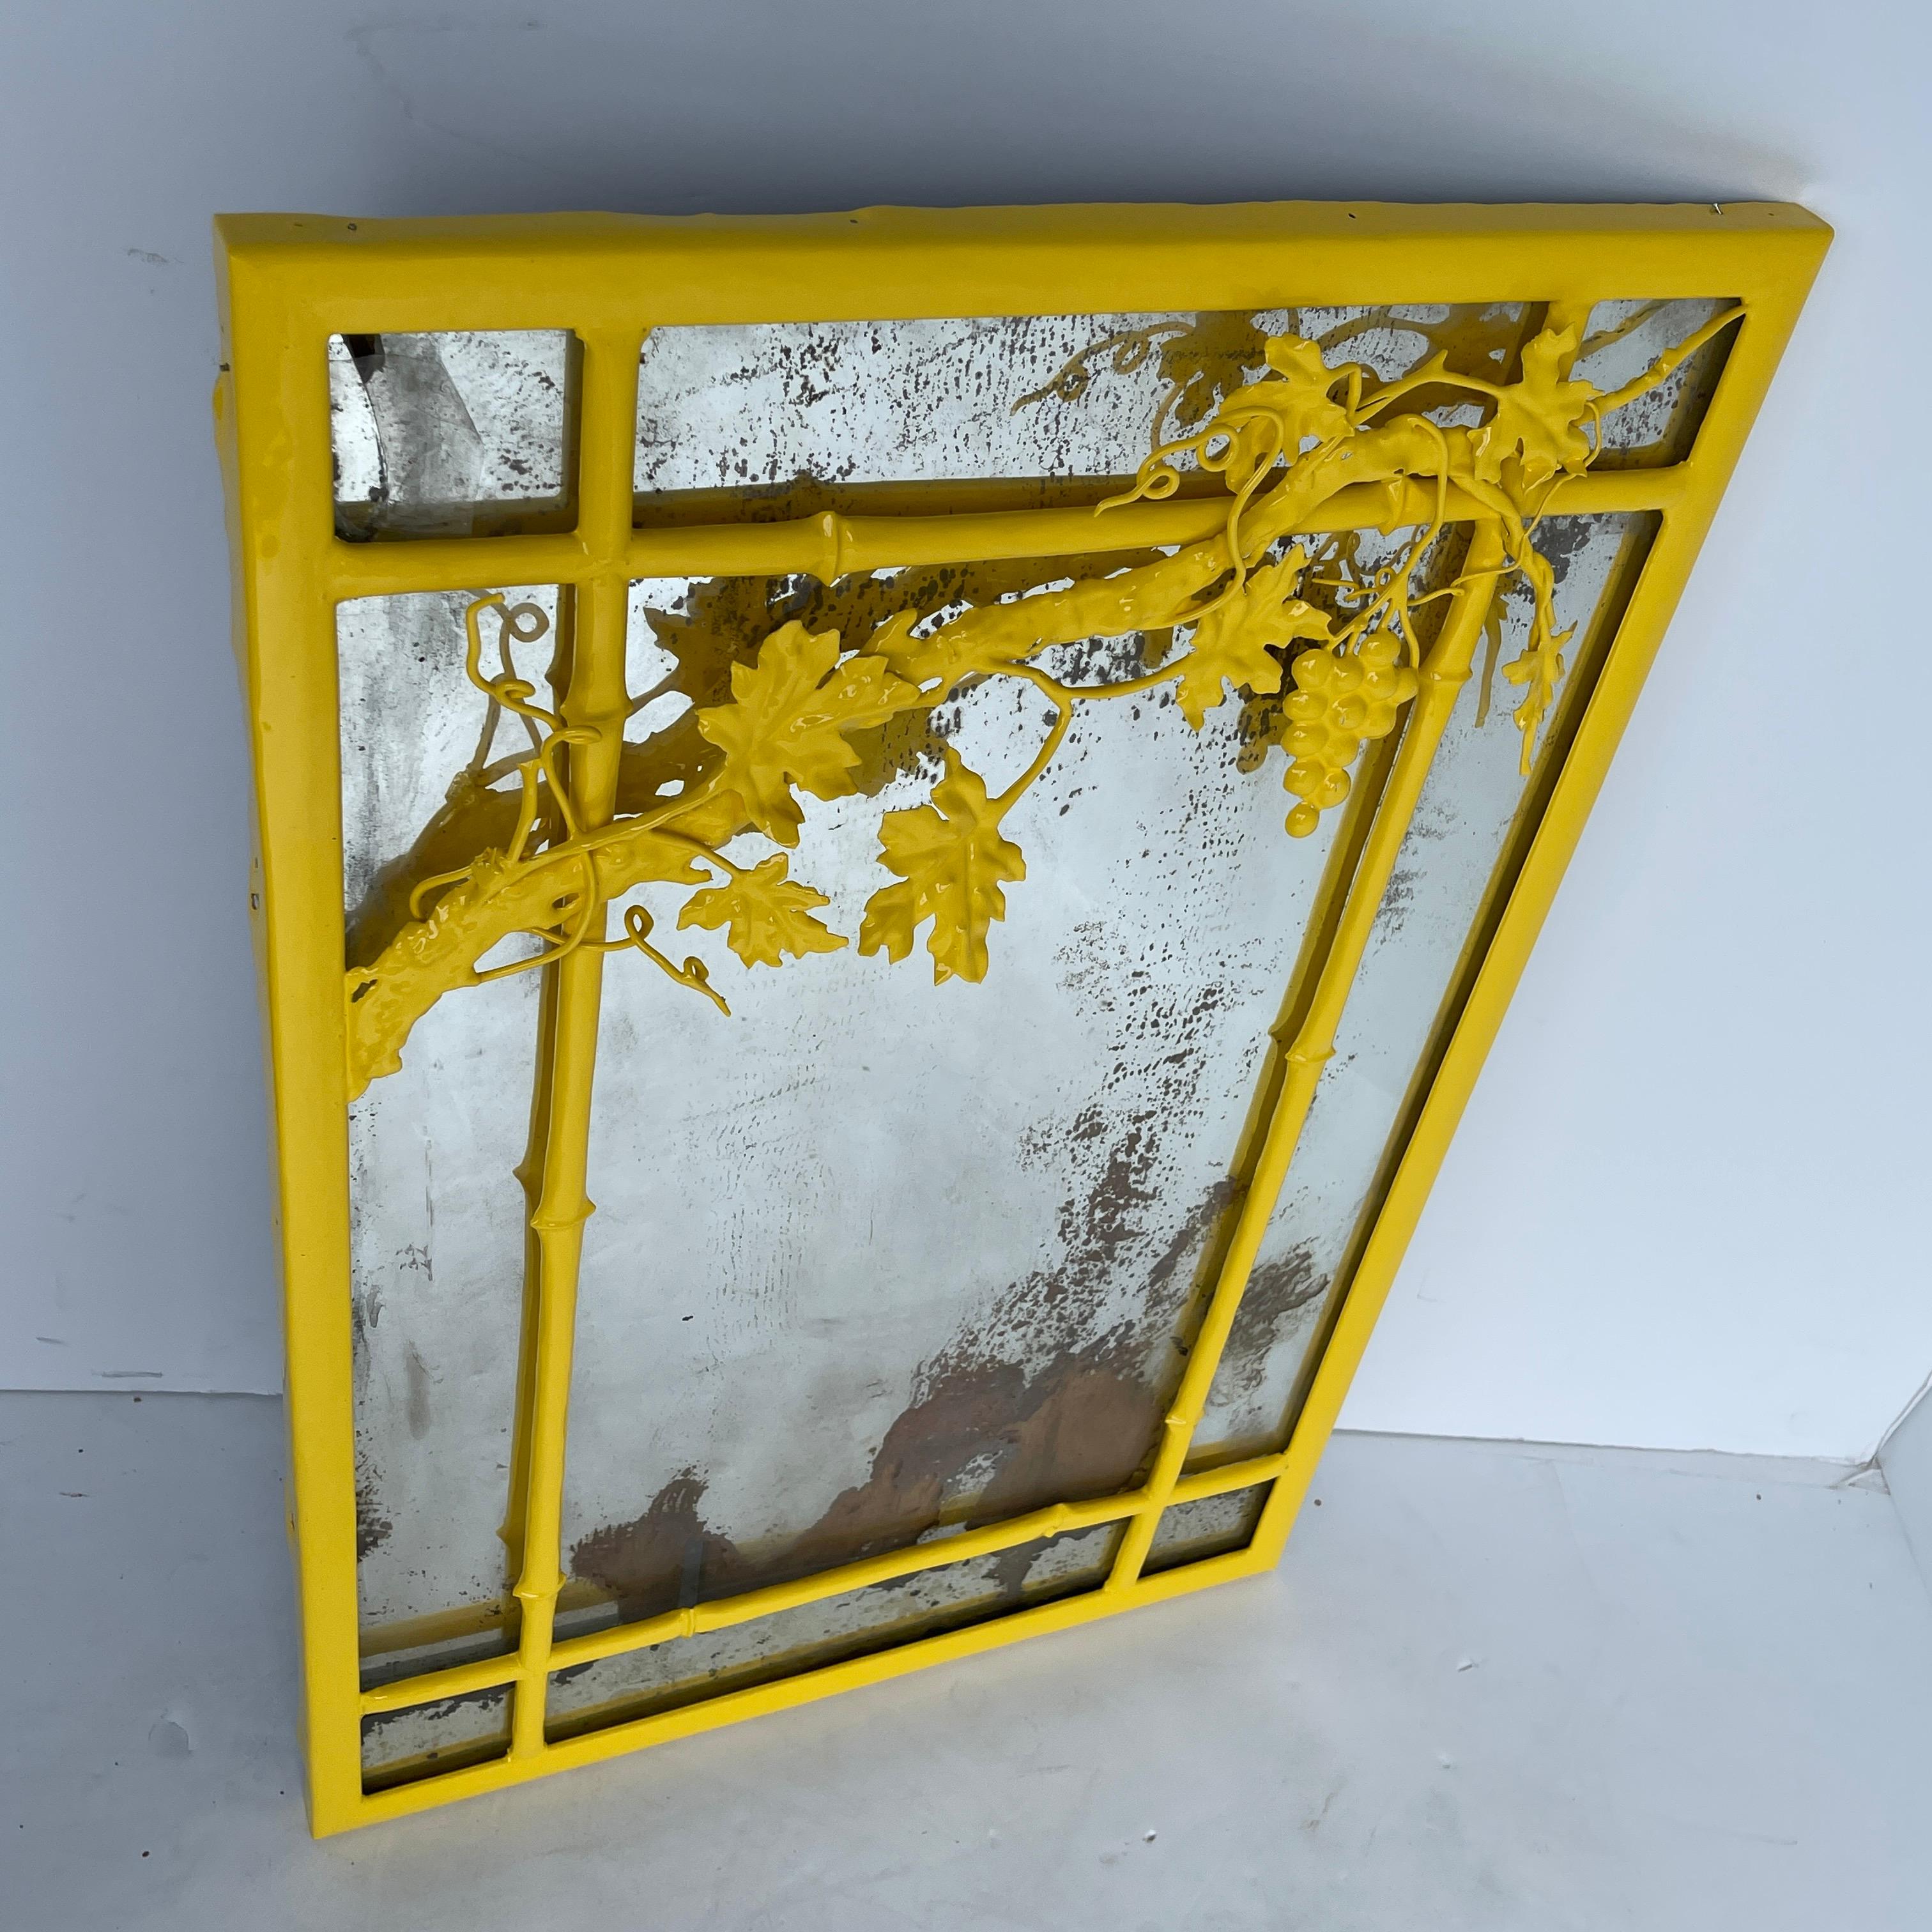 Mid-Century Modern bright sunshine yellow powder-coated painted wall mirror. 
This vintage bright and bold yellow wall mirror has heavy metal frame with beautifully decorated grape, leaf and branch design. The mirror glass is in a original vintage